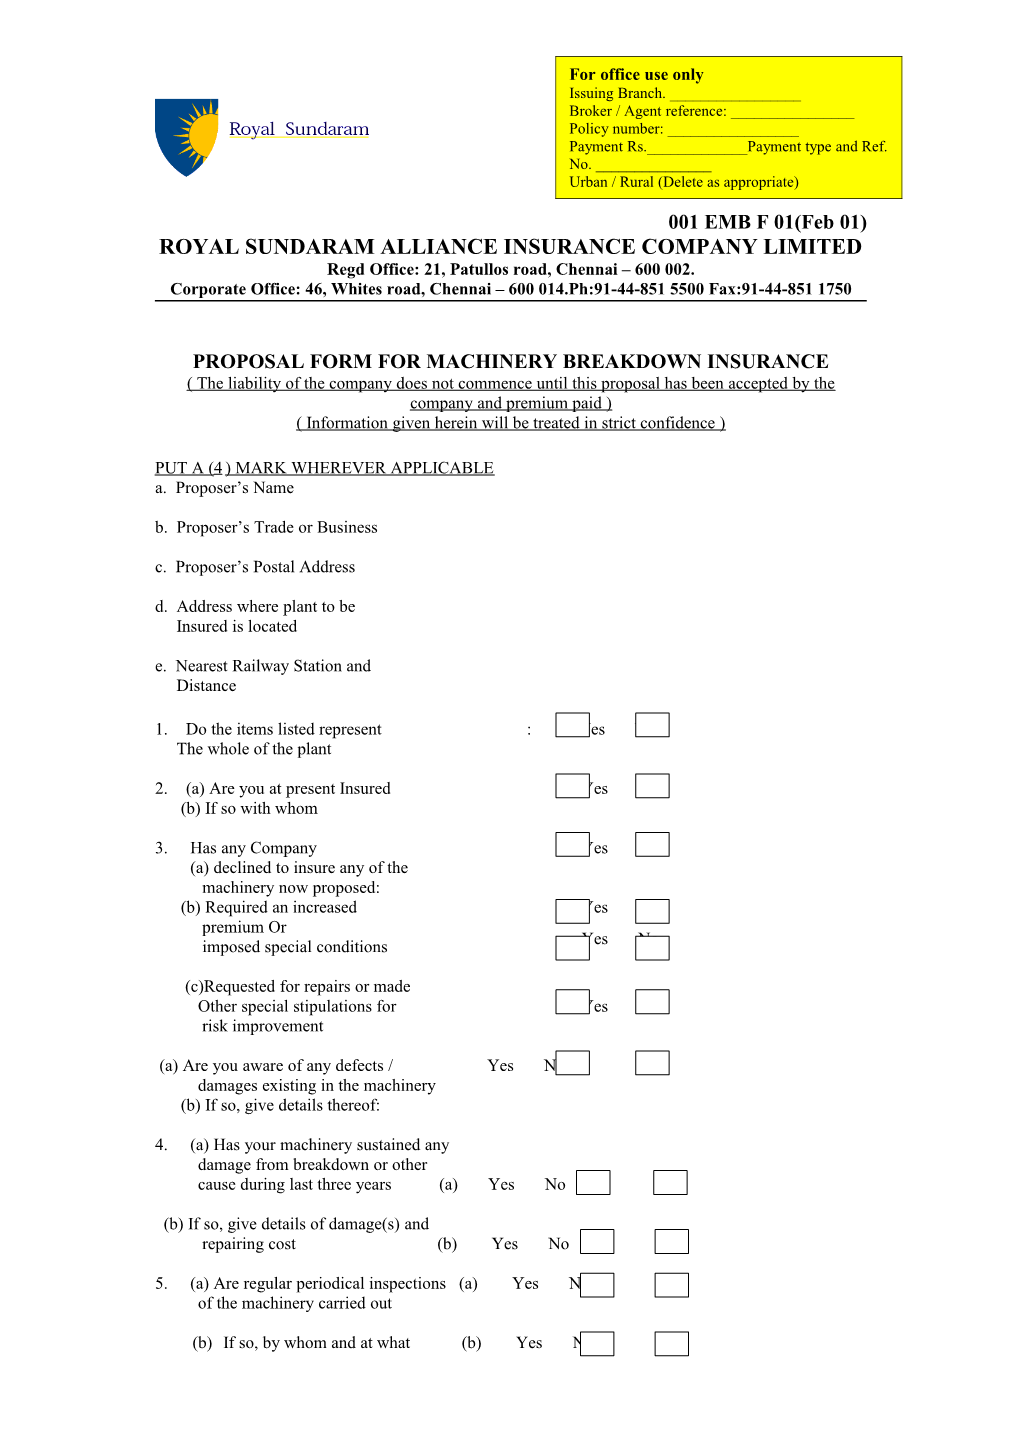 Proposal Form for Machinery Insurance